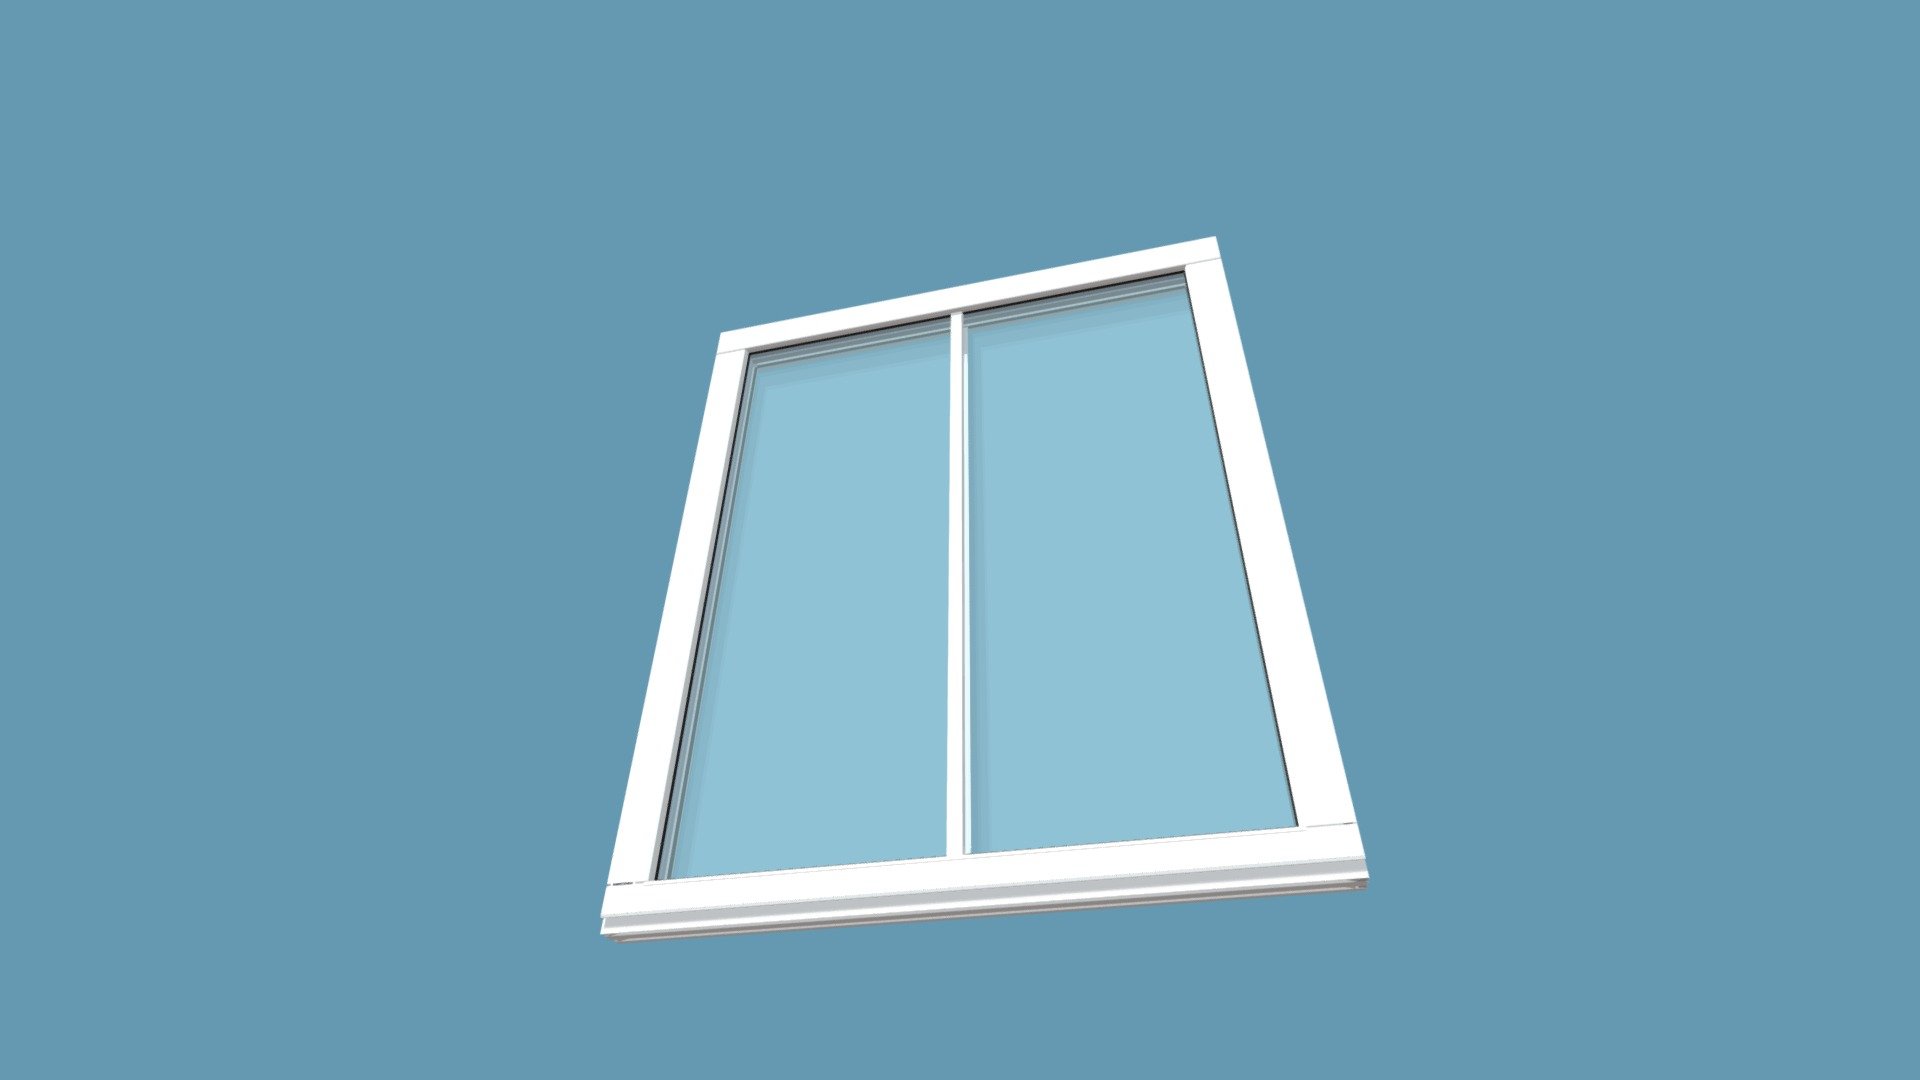 We represent You 100+ windows for Your project. There are 229 .obj files of windows that are closed, opened and in ventilated position. We also added .blend file where there is an animated timeline of every window - Windows-Package.blend.

These windows can easily be used in architecture projects for interior and exterior design. Material slots can be easily used 3d model